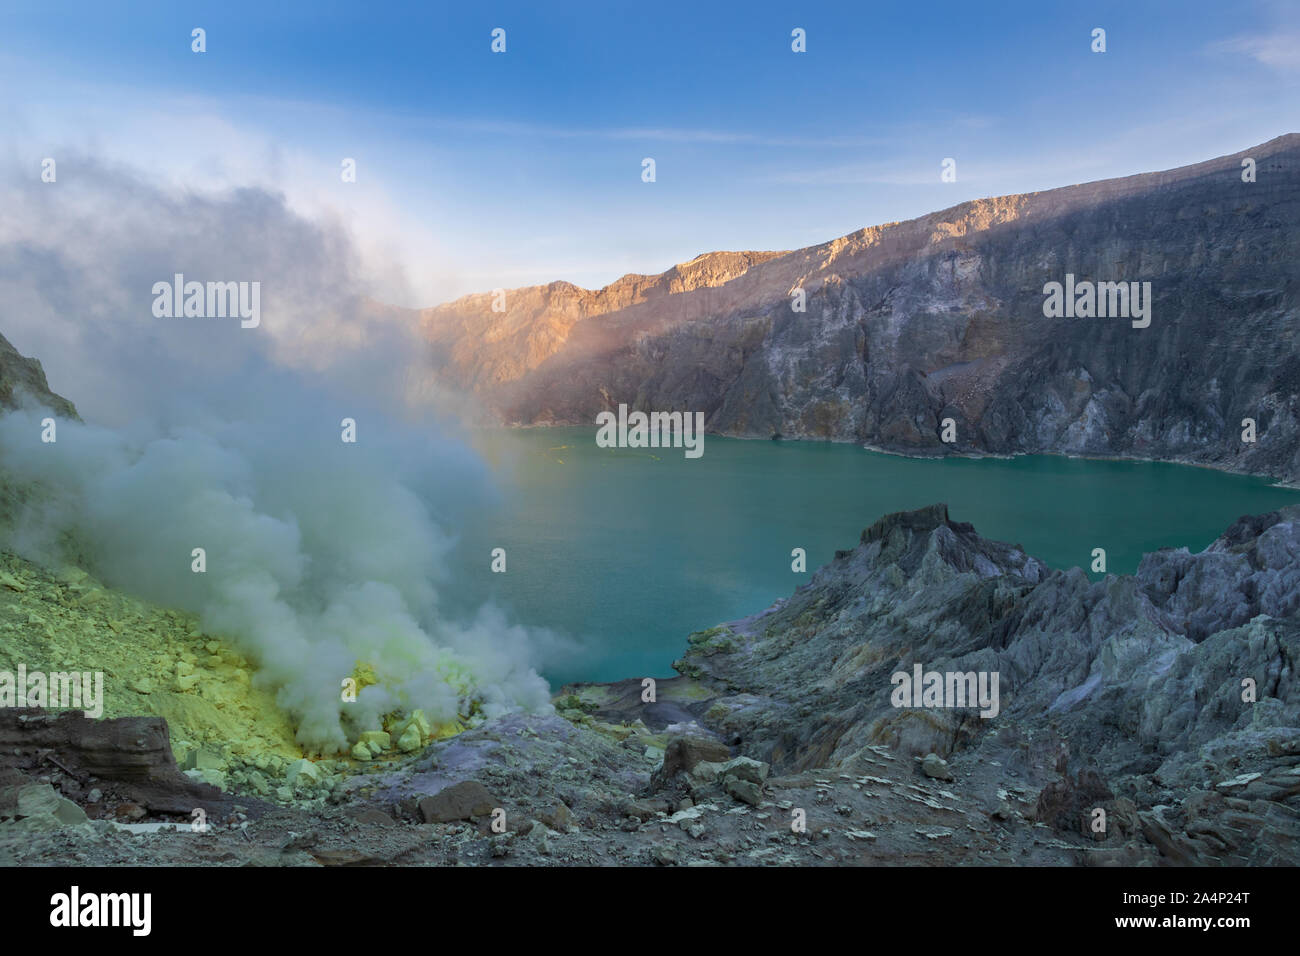 Acid lake in the crater of Mount Ijen, East Java, Indonesia. Smoke and sulfur deposits on shore from volcanic vents. Blue sky behind far crater wall. Stock Photo